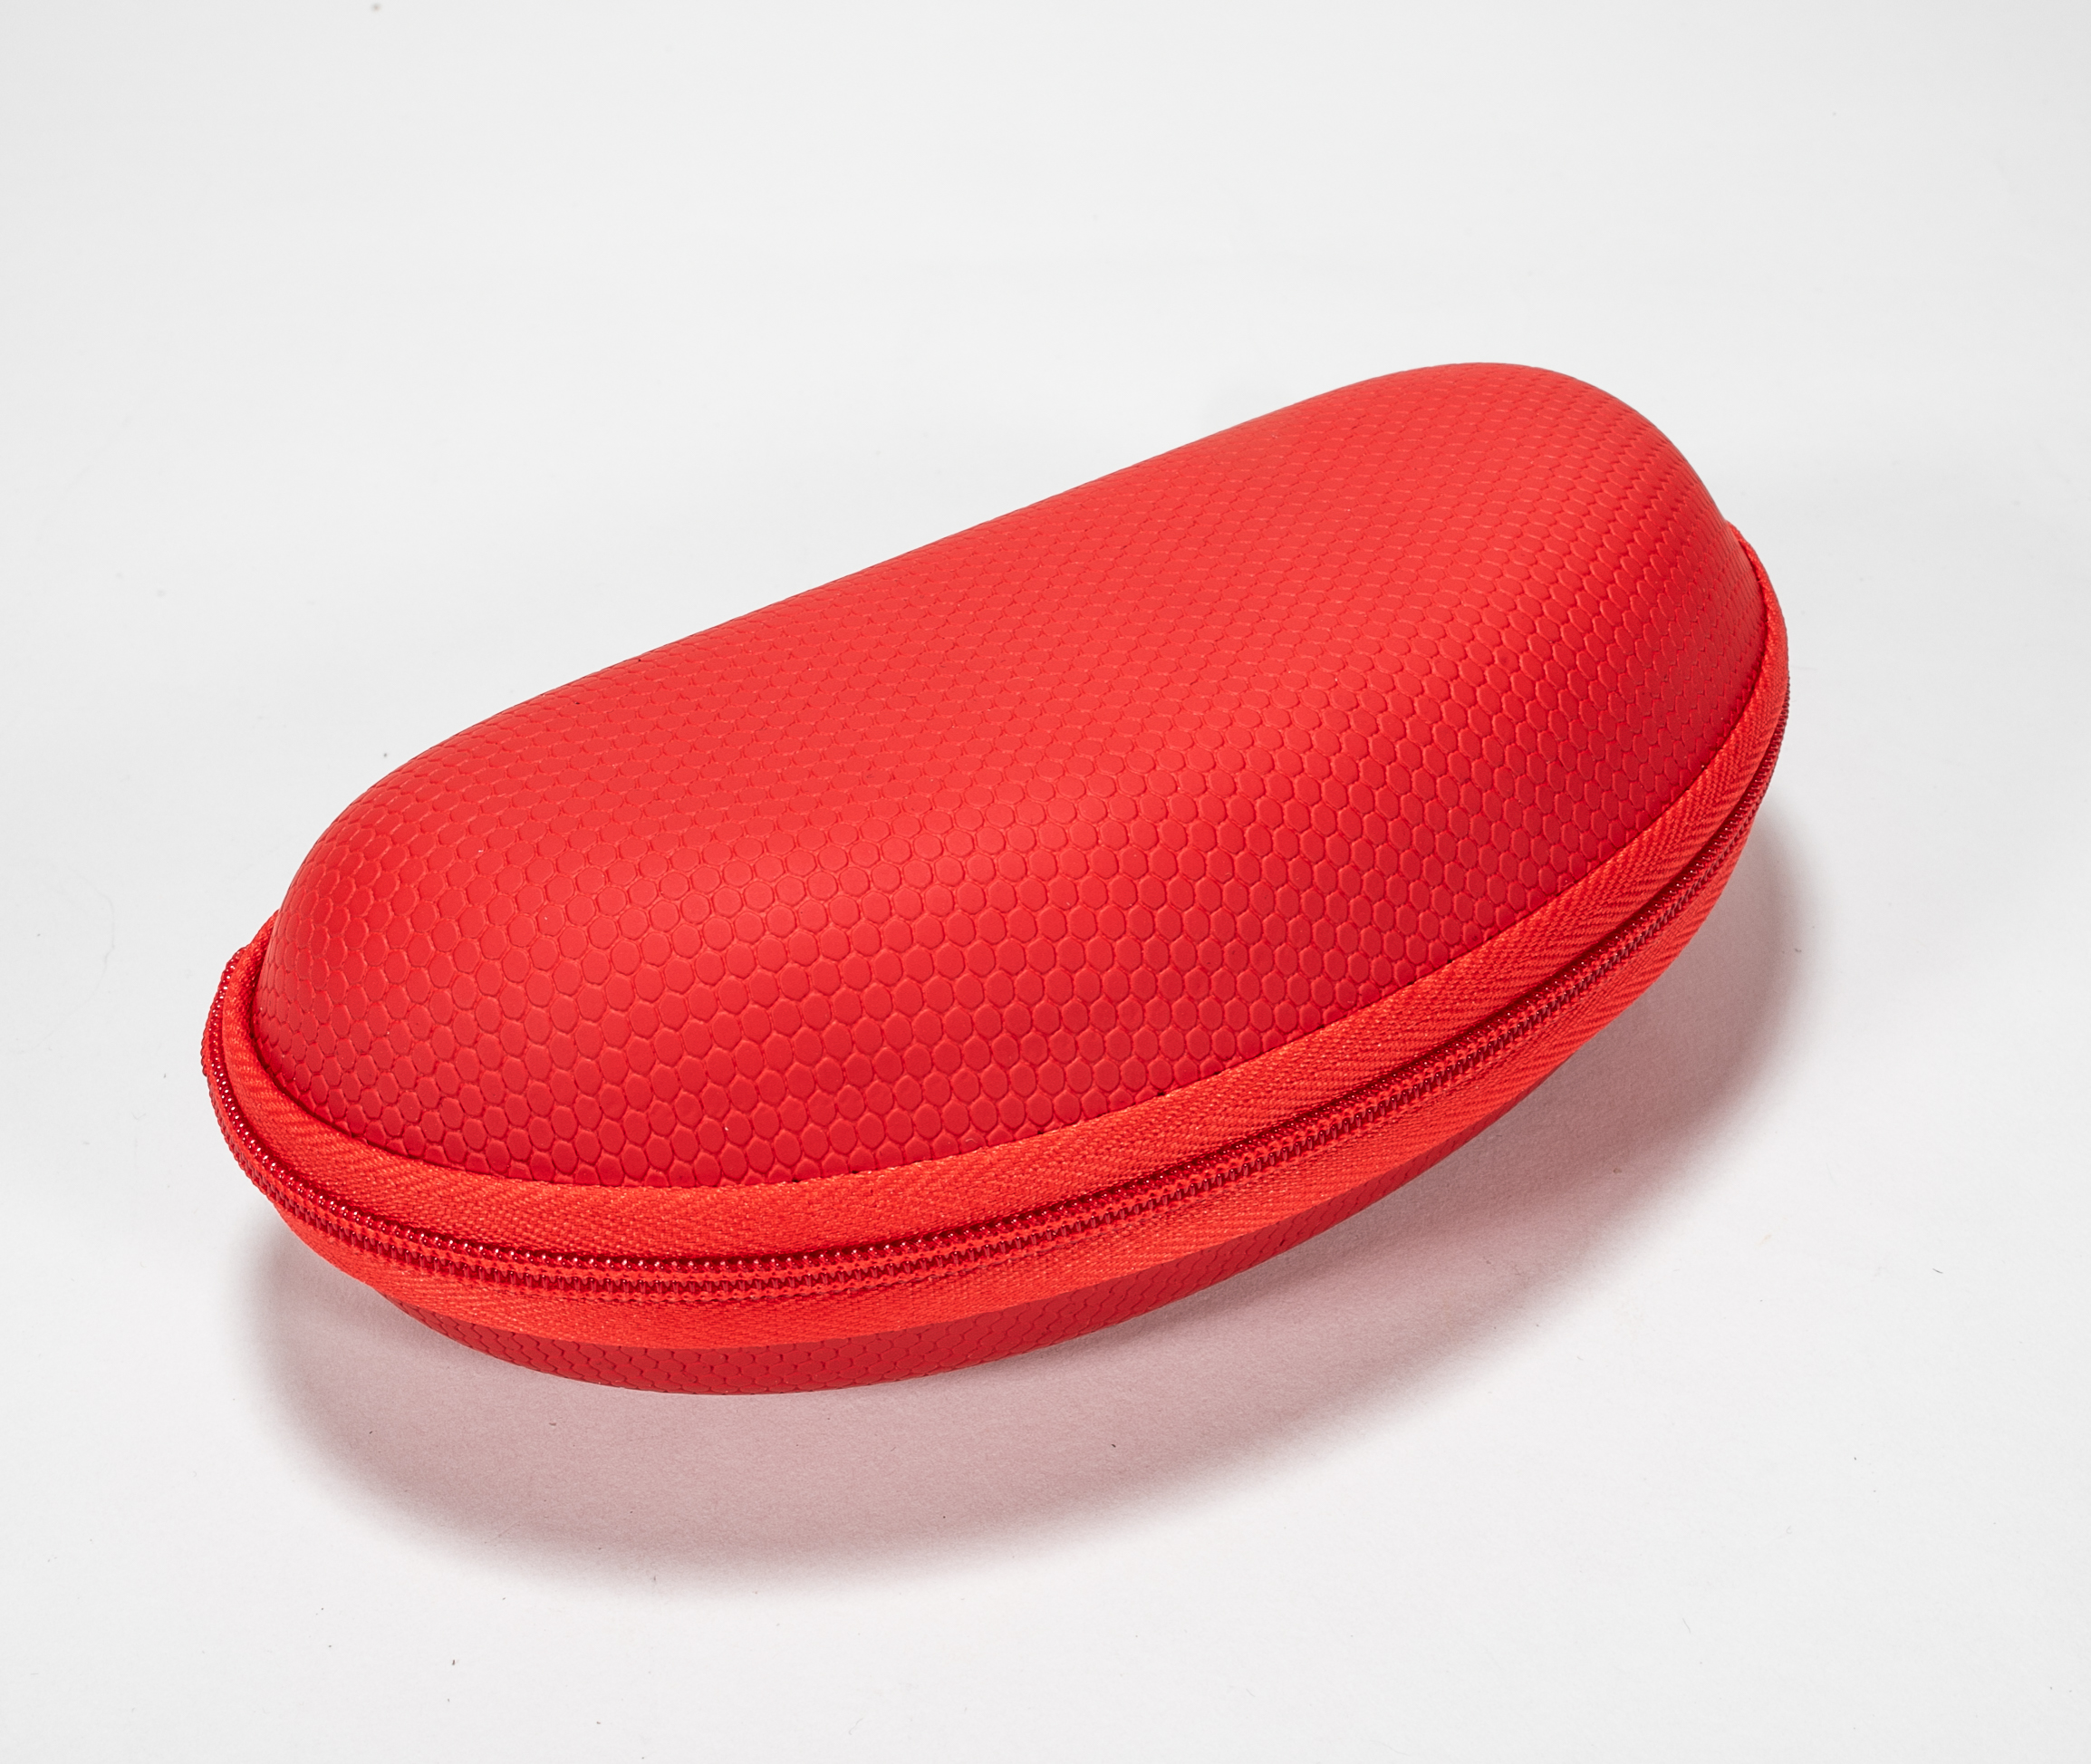 Eyeglasses Case Portable Zipper Protect Case with Clip, Fit for Safety Reading Glasses Case